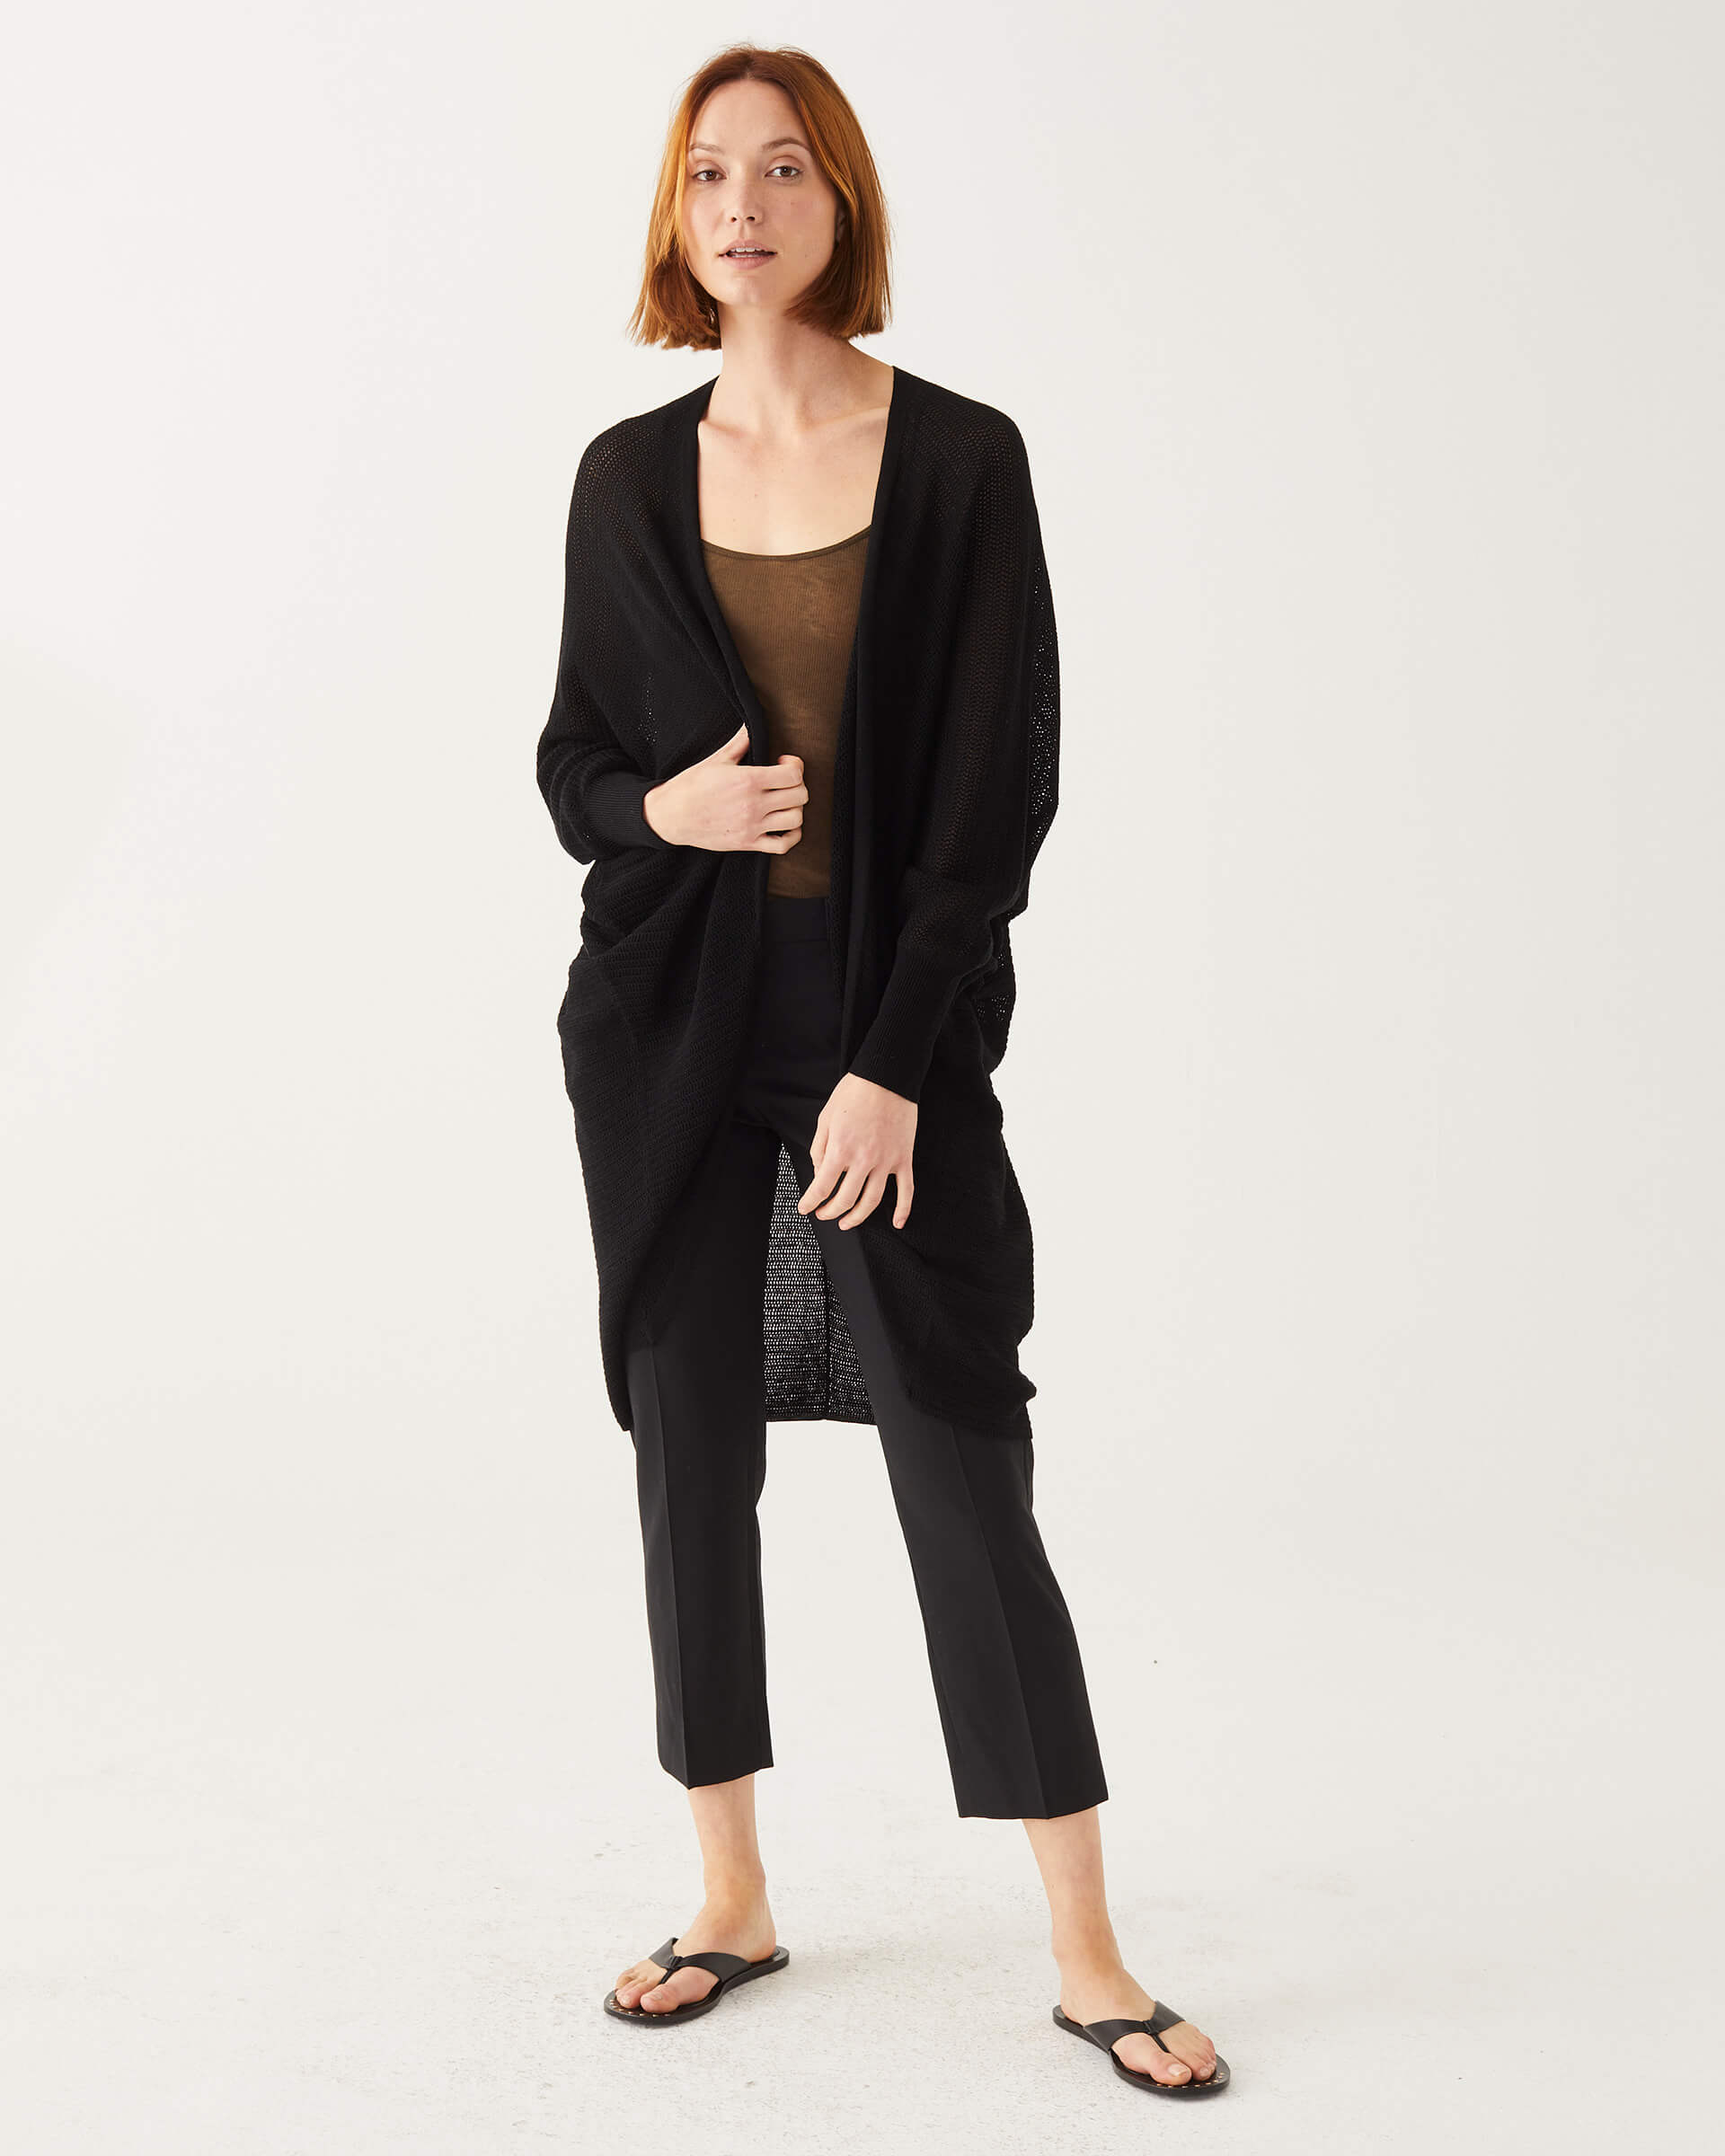 female putting on black cardigan with dolman sleeves on a white background